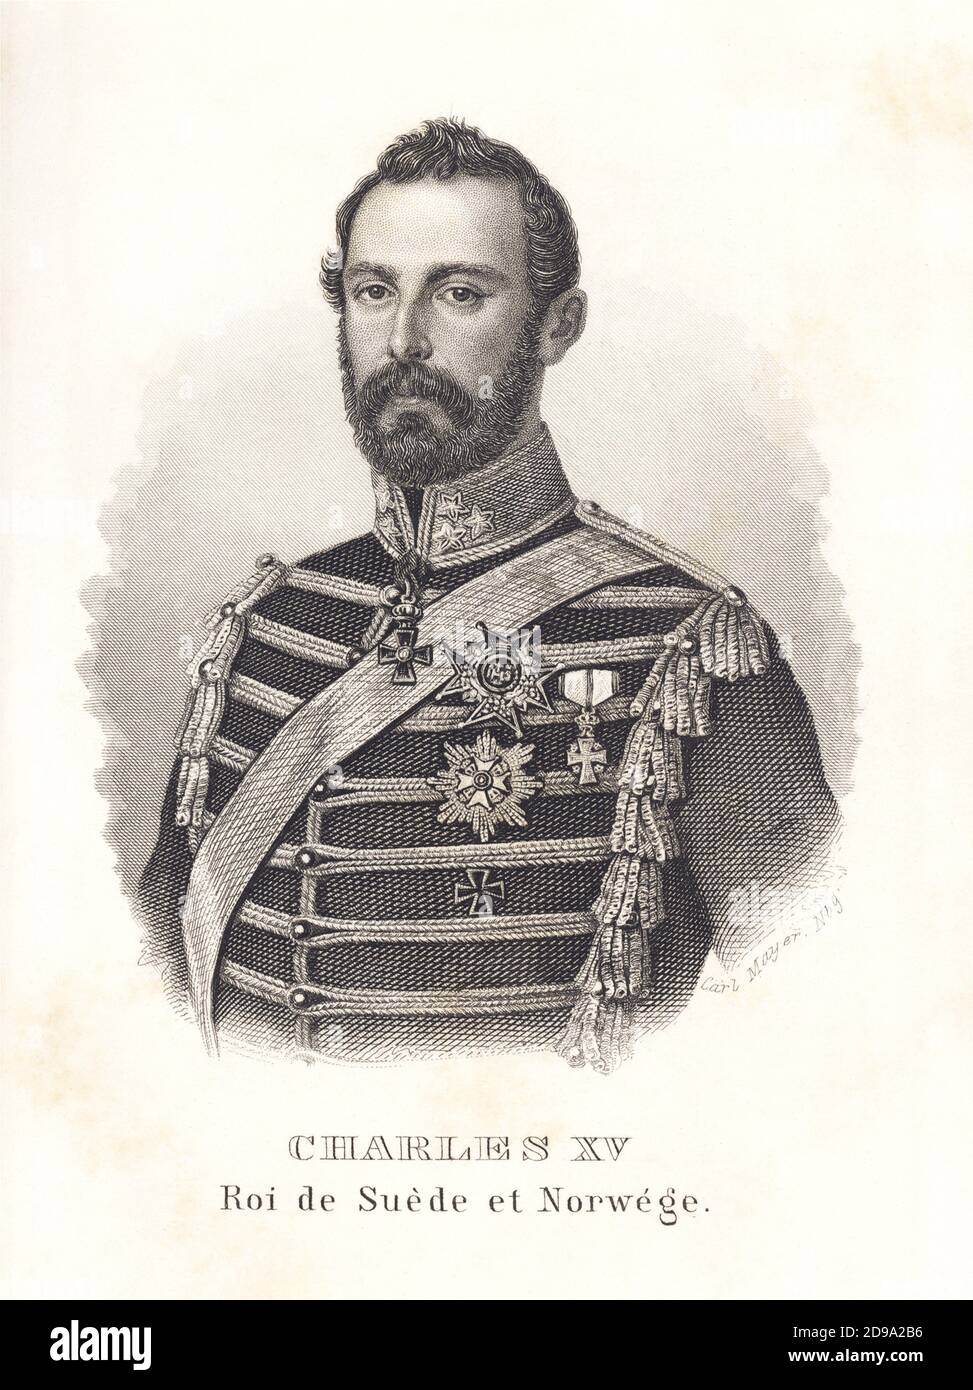 1861 : The  King of Sweden and Norway Charles XV of Sweden and IV of Norway ( CARL , 1826 - 1872 ). Engraved portrait from ALMANACH DE GOTHA , 1861. Charles married in   holm on 19 june 1850 the Princess Louise of Netherland Mecklenburg-Strelitz ( 1828 - 1871 ), niece of William II of the Netherlands through her father and niece of William I of Prussia, German Emperor, through her mother. Charles was the son of King Oscar I of Sweden and Norway and Queen Josefina of Sweden and Norway (née Princess Josephine of Leuchtenberg). The marriage was arranged to provide the new Bernadotte dynasty . The Stock Photo